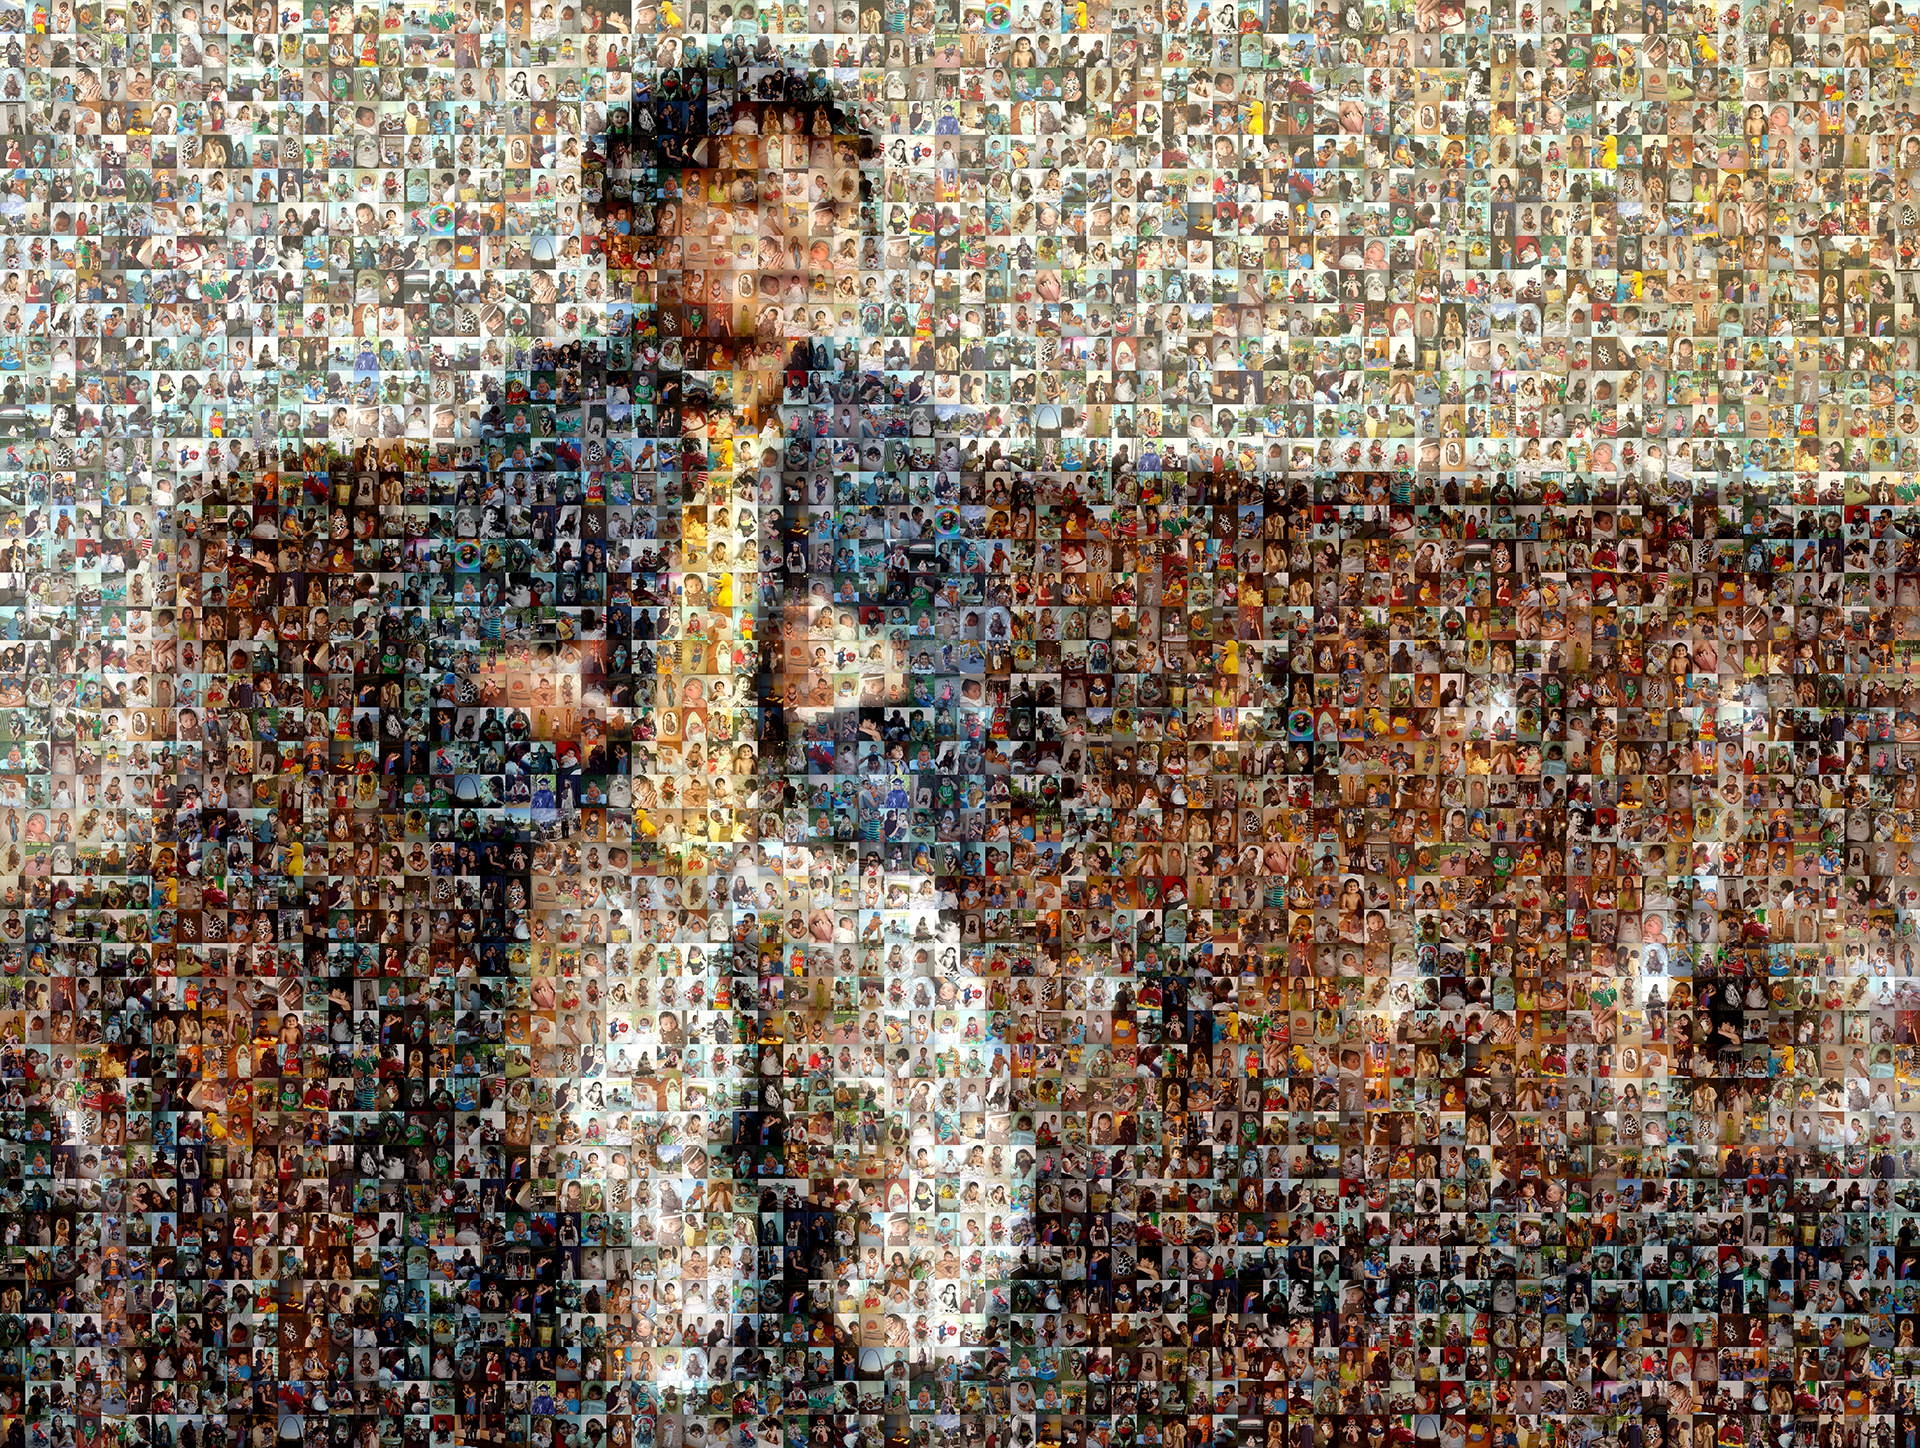 photo mosaic distance portrait of young boy using 534 photos of his childhood